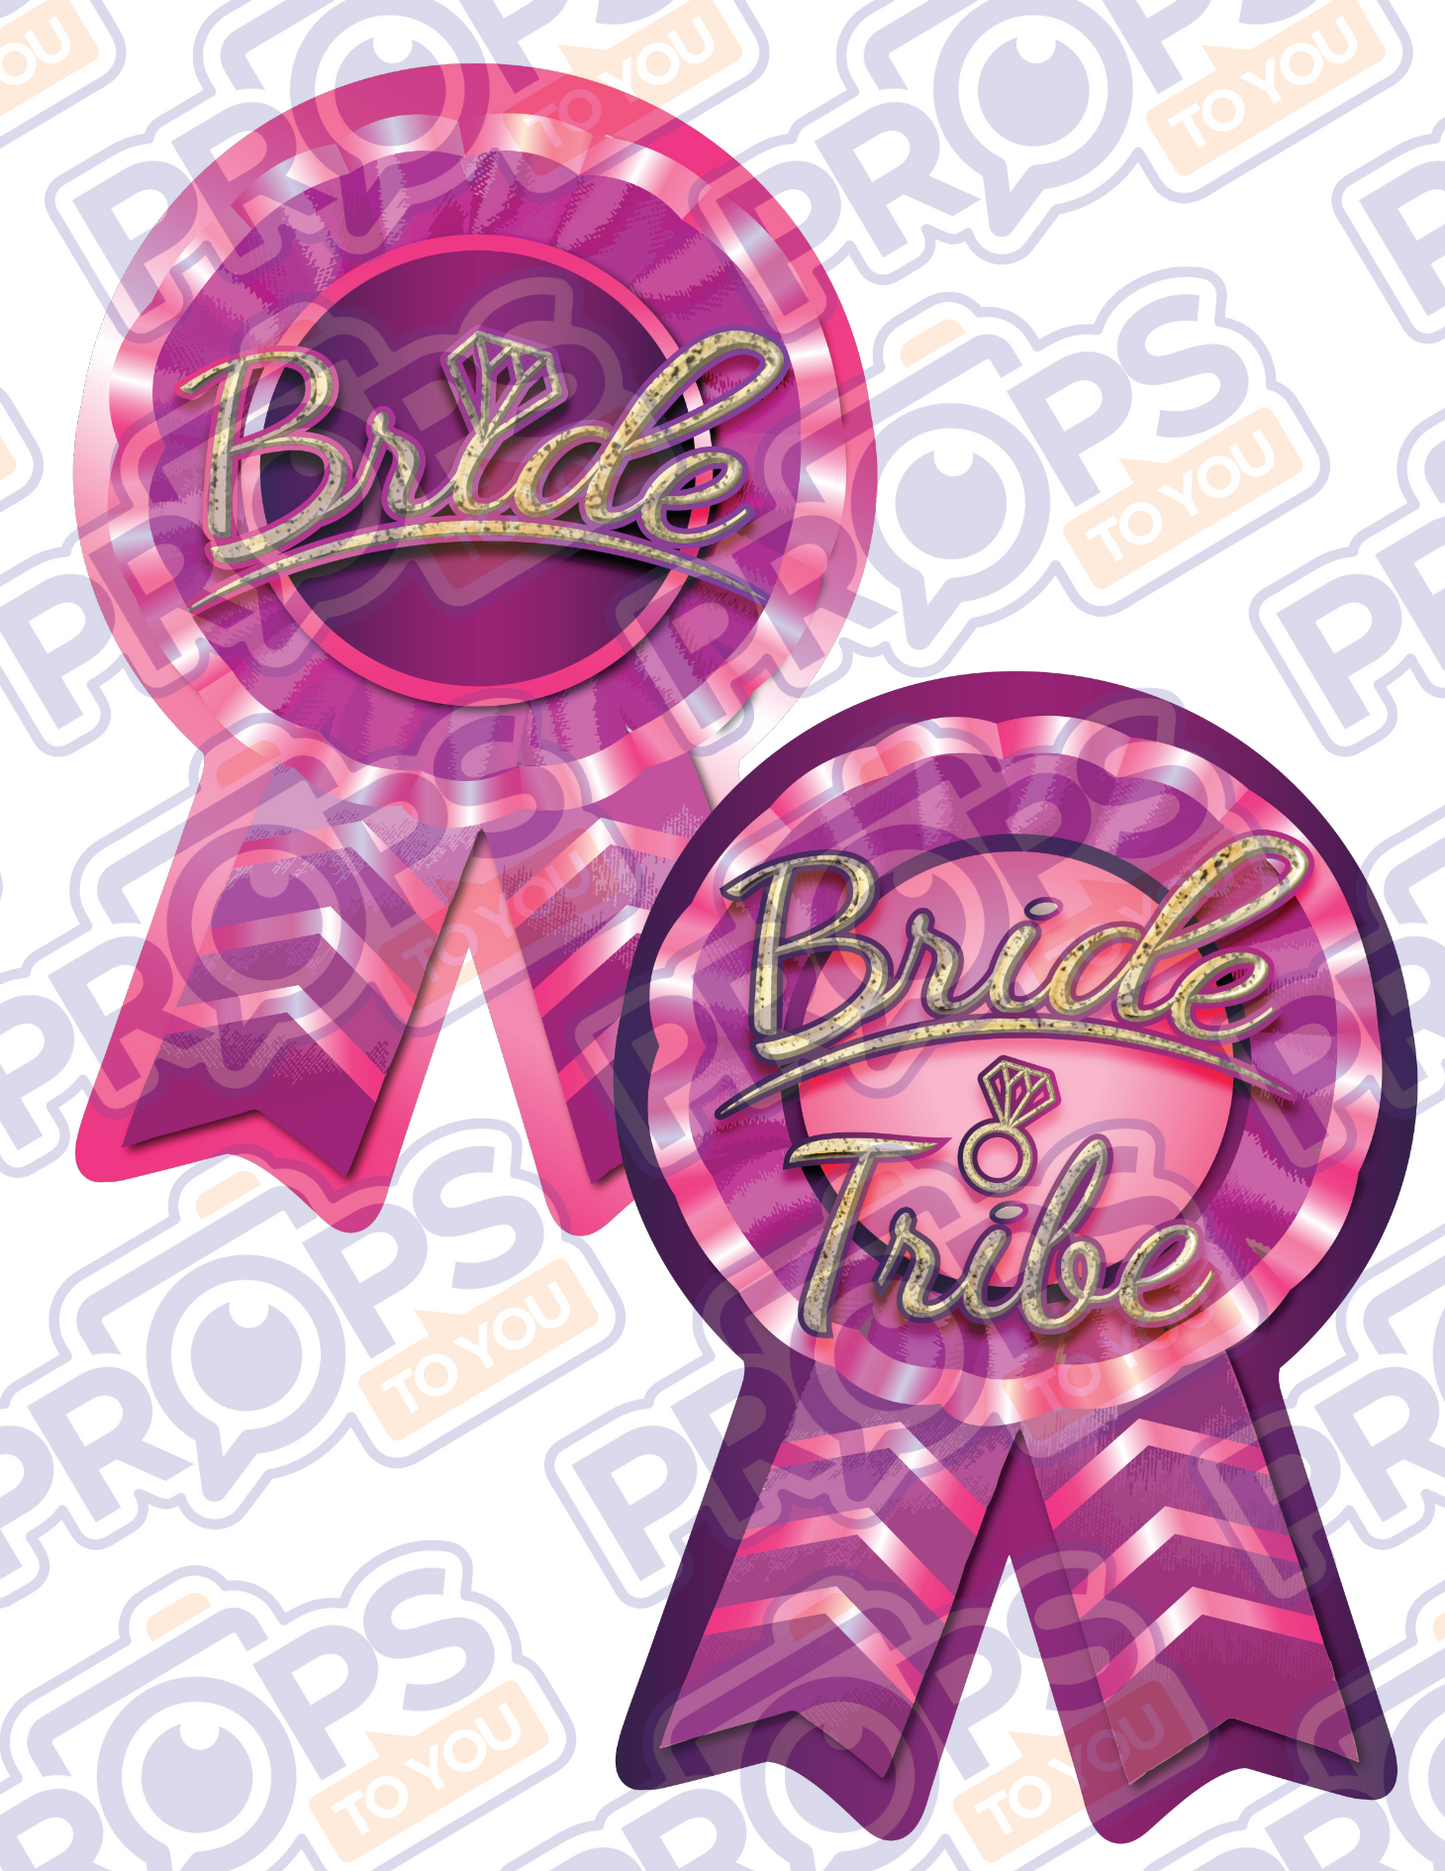 BUNDLE! Bachelorette - 5 Double-Sided Photo Booth Props